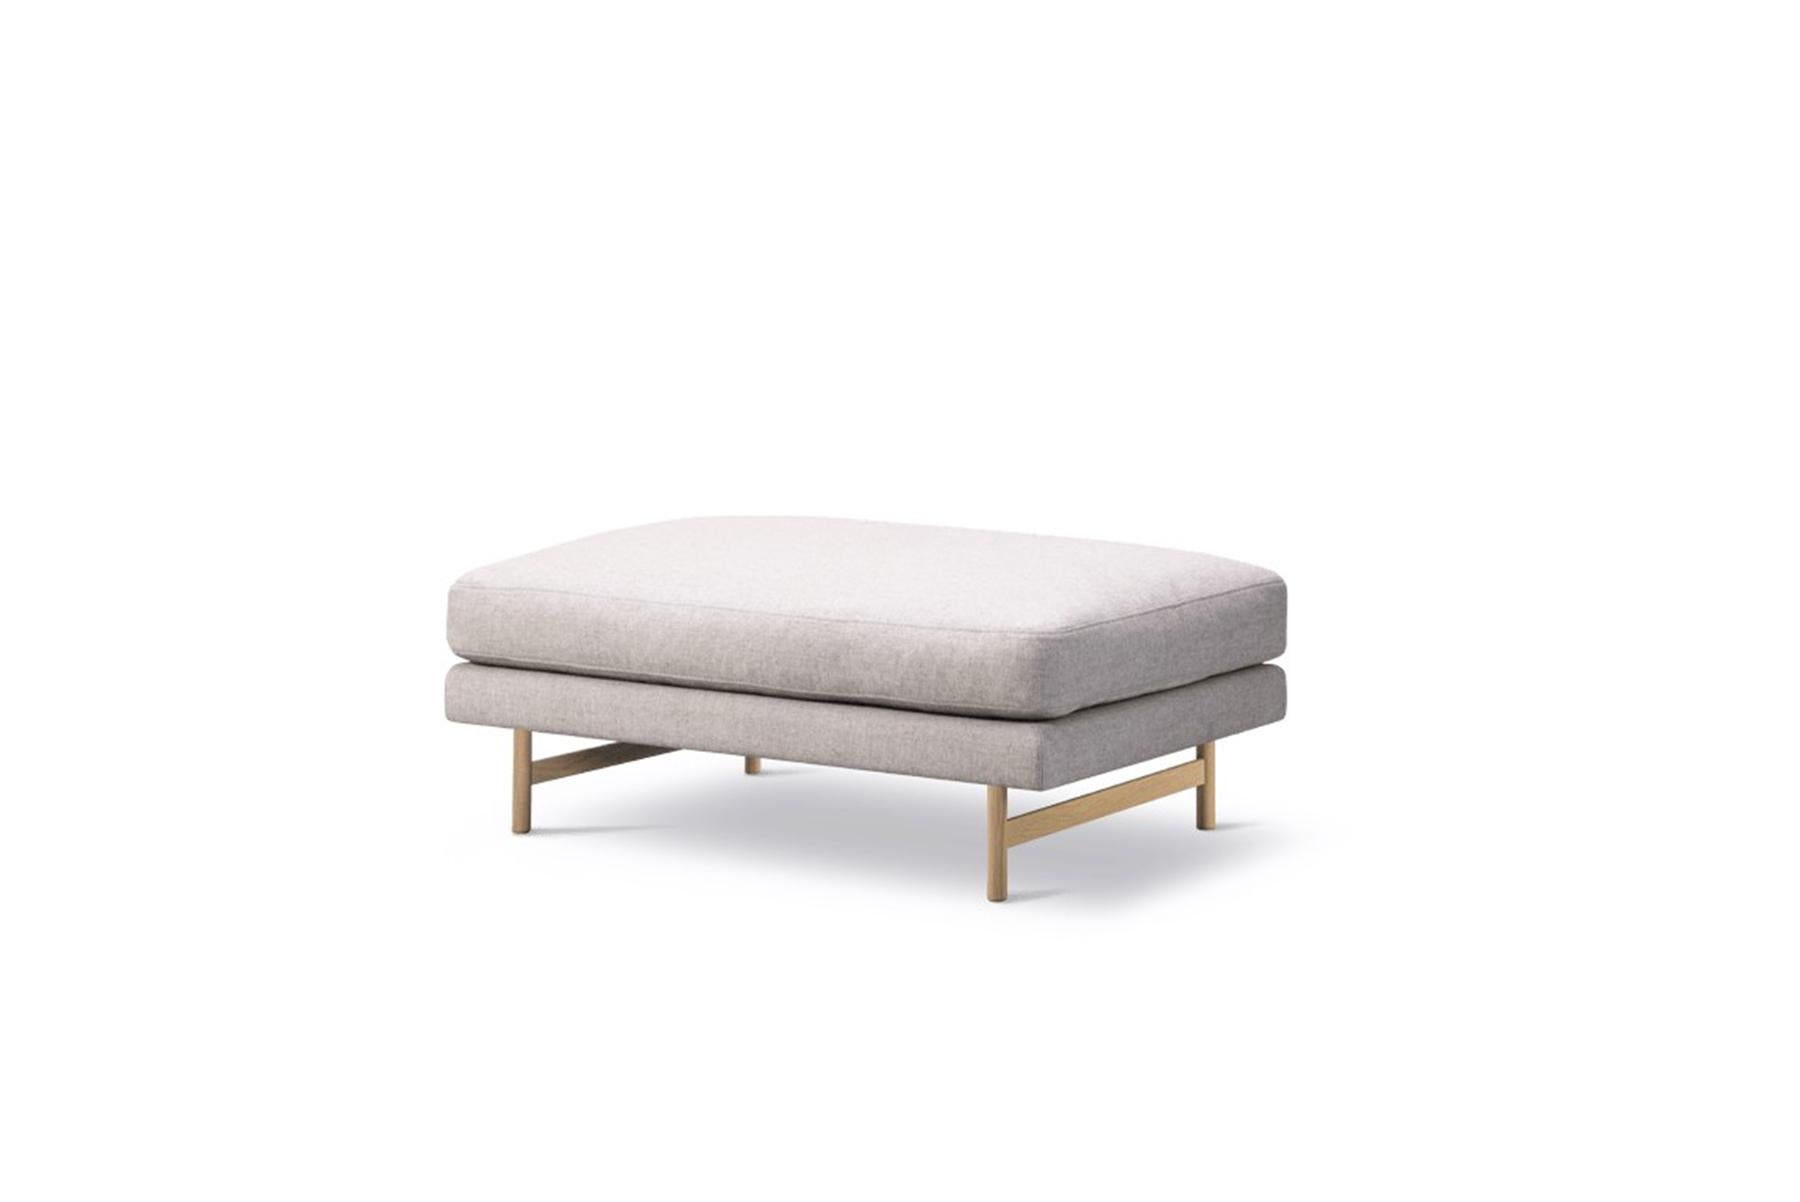 Hugo Passos Calmo ottoman 95, wood base echoing the same linear look of the rest of the series, the Calmo ottoman is an excellent option for personalizing a lounge setting with an extra element of comfort.